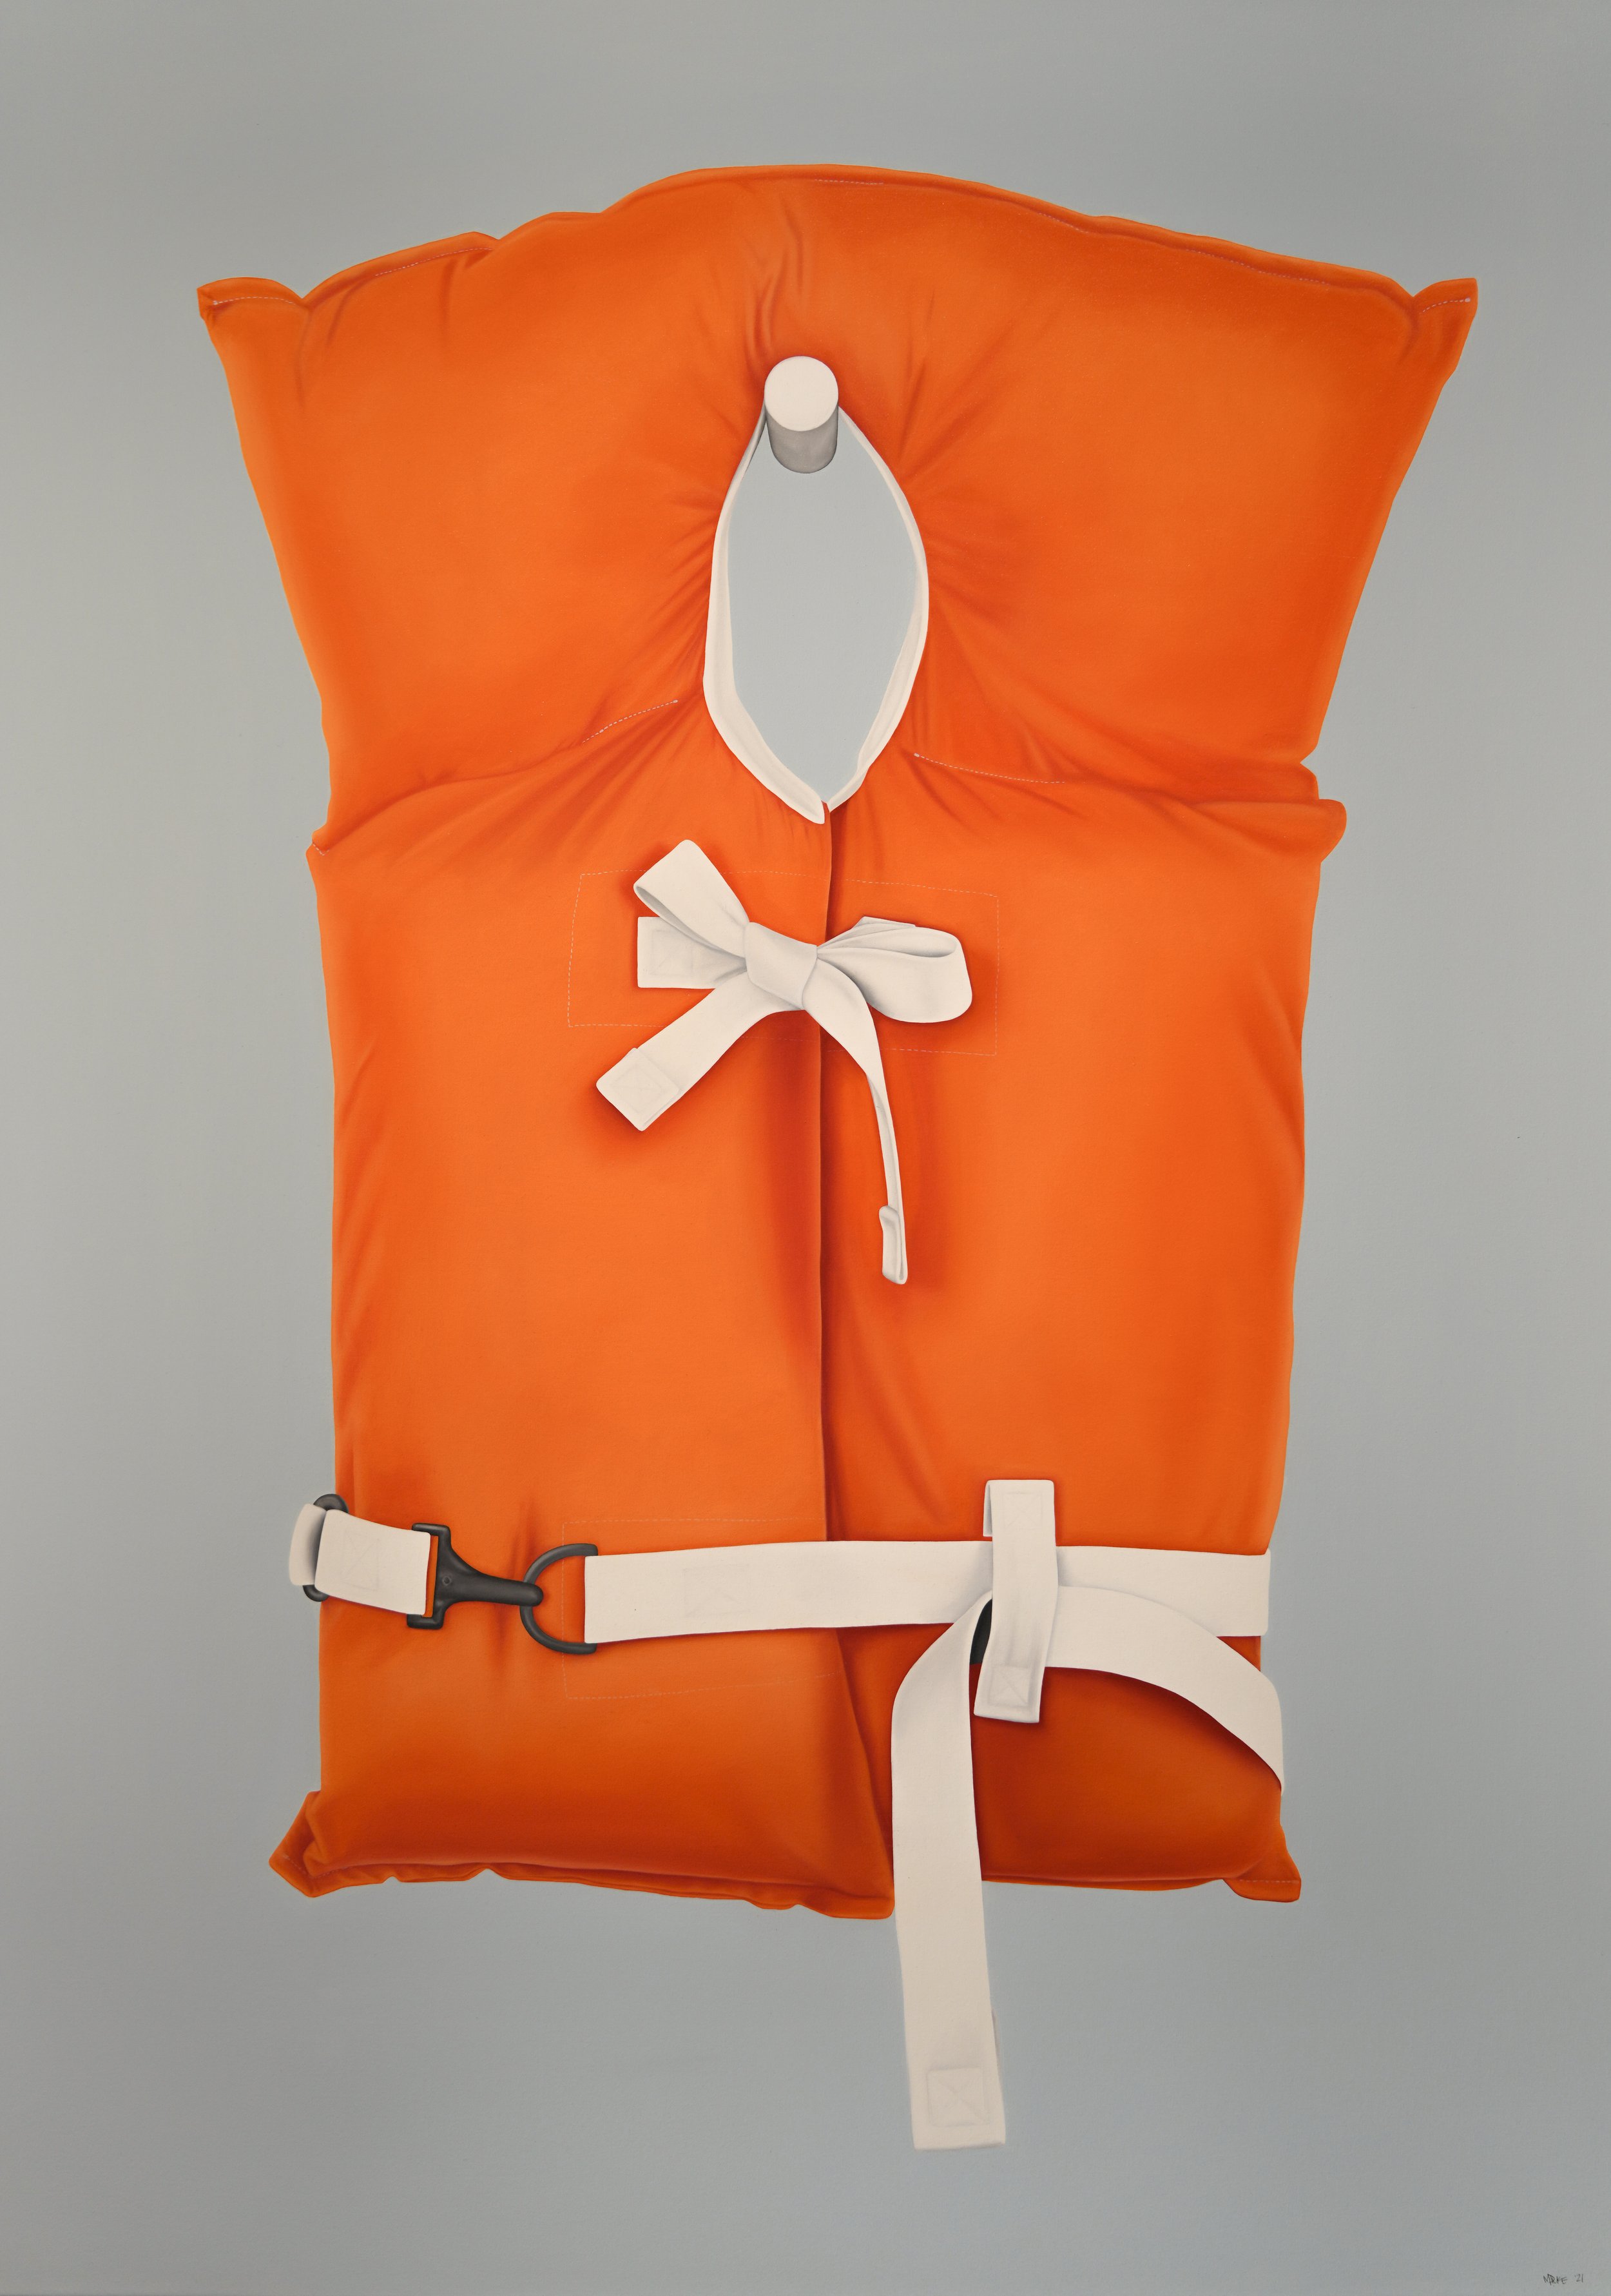 PFD (Personal Floatation Device)